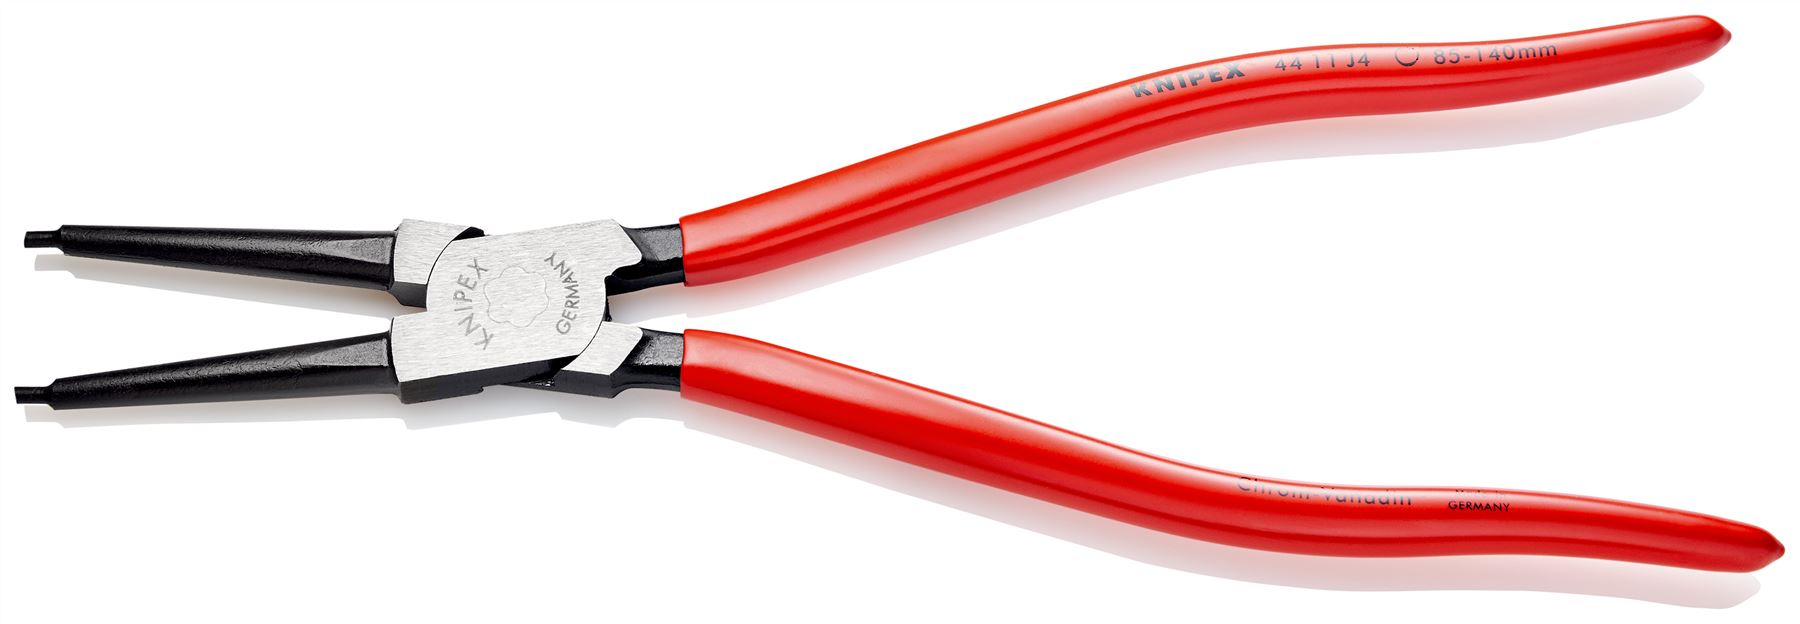 KNIPEX Circlip Pliers for Internal Circlips in Bore Holes 320mm 3.2mm Diameter Tips 44 11 J4